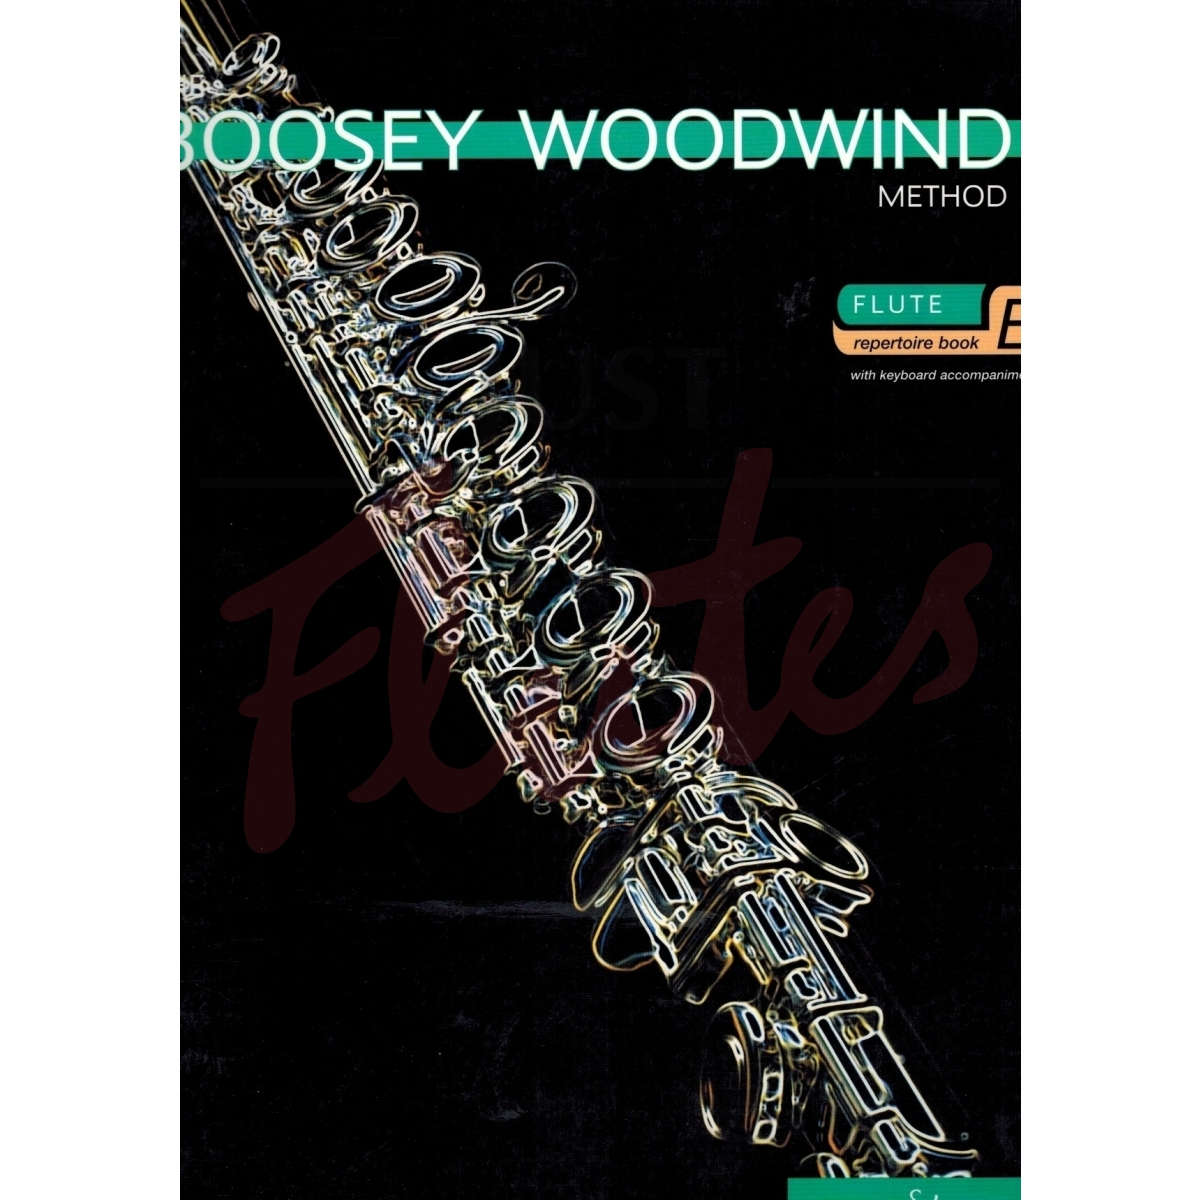 The Boosey Woodwind Method [Flute] Repertoire Book B